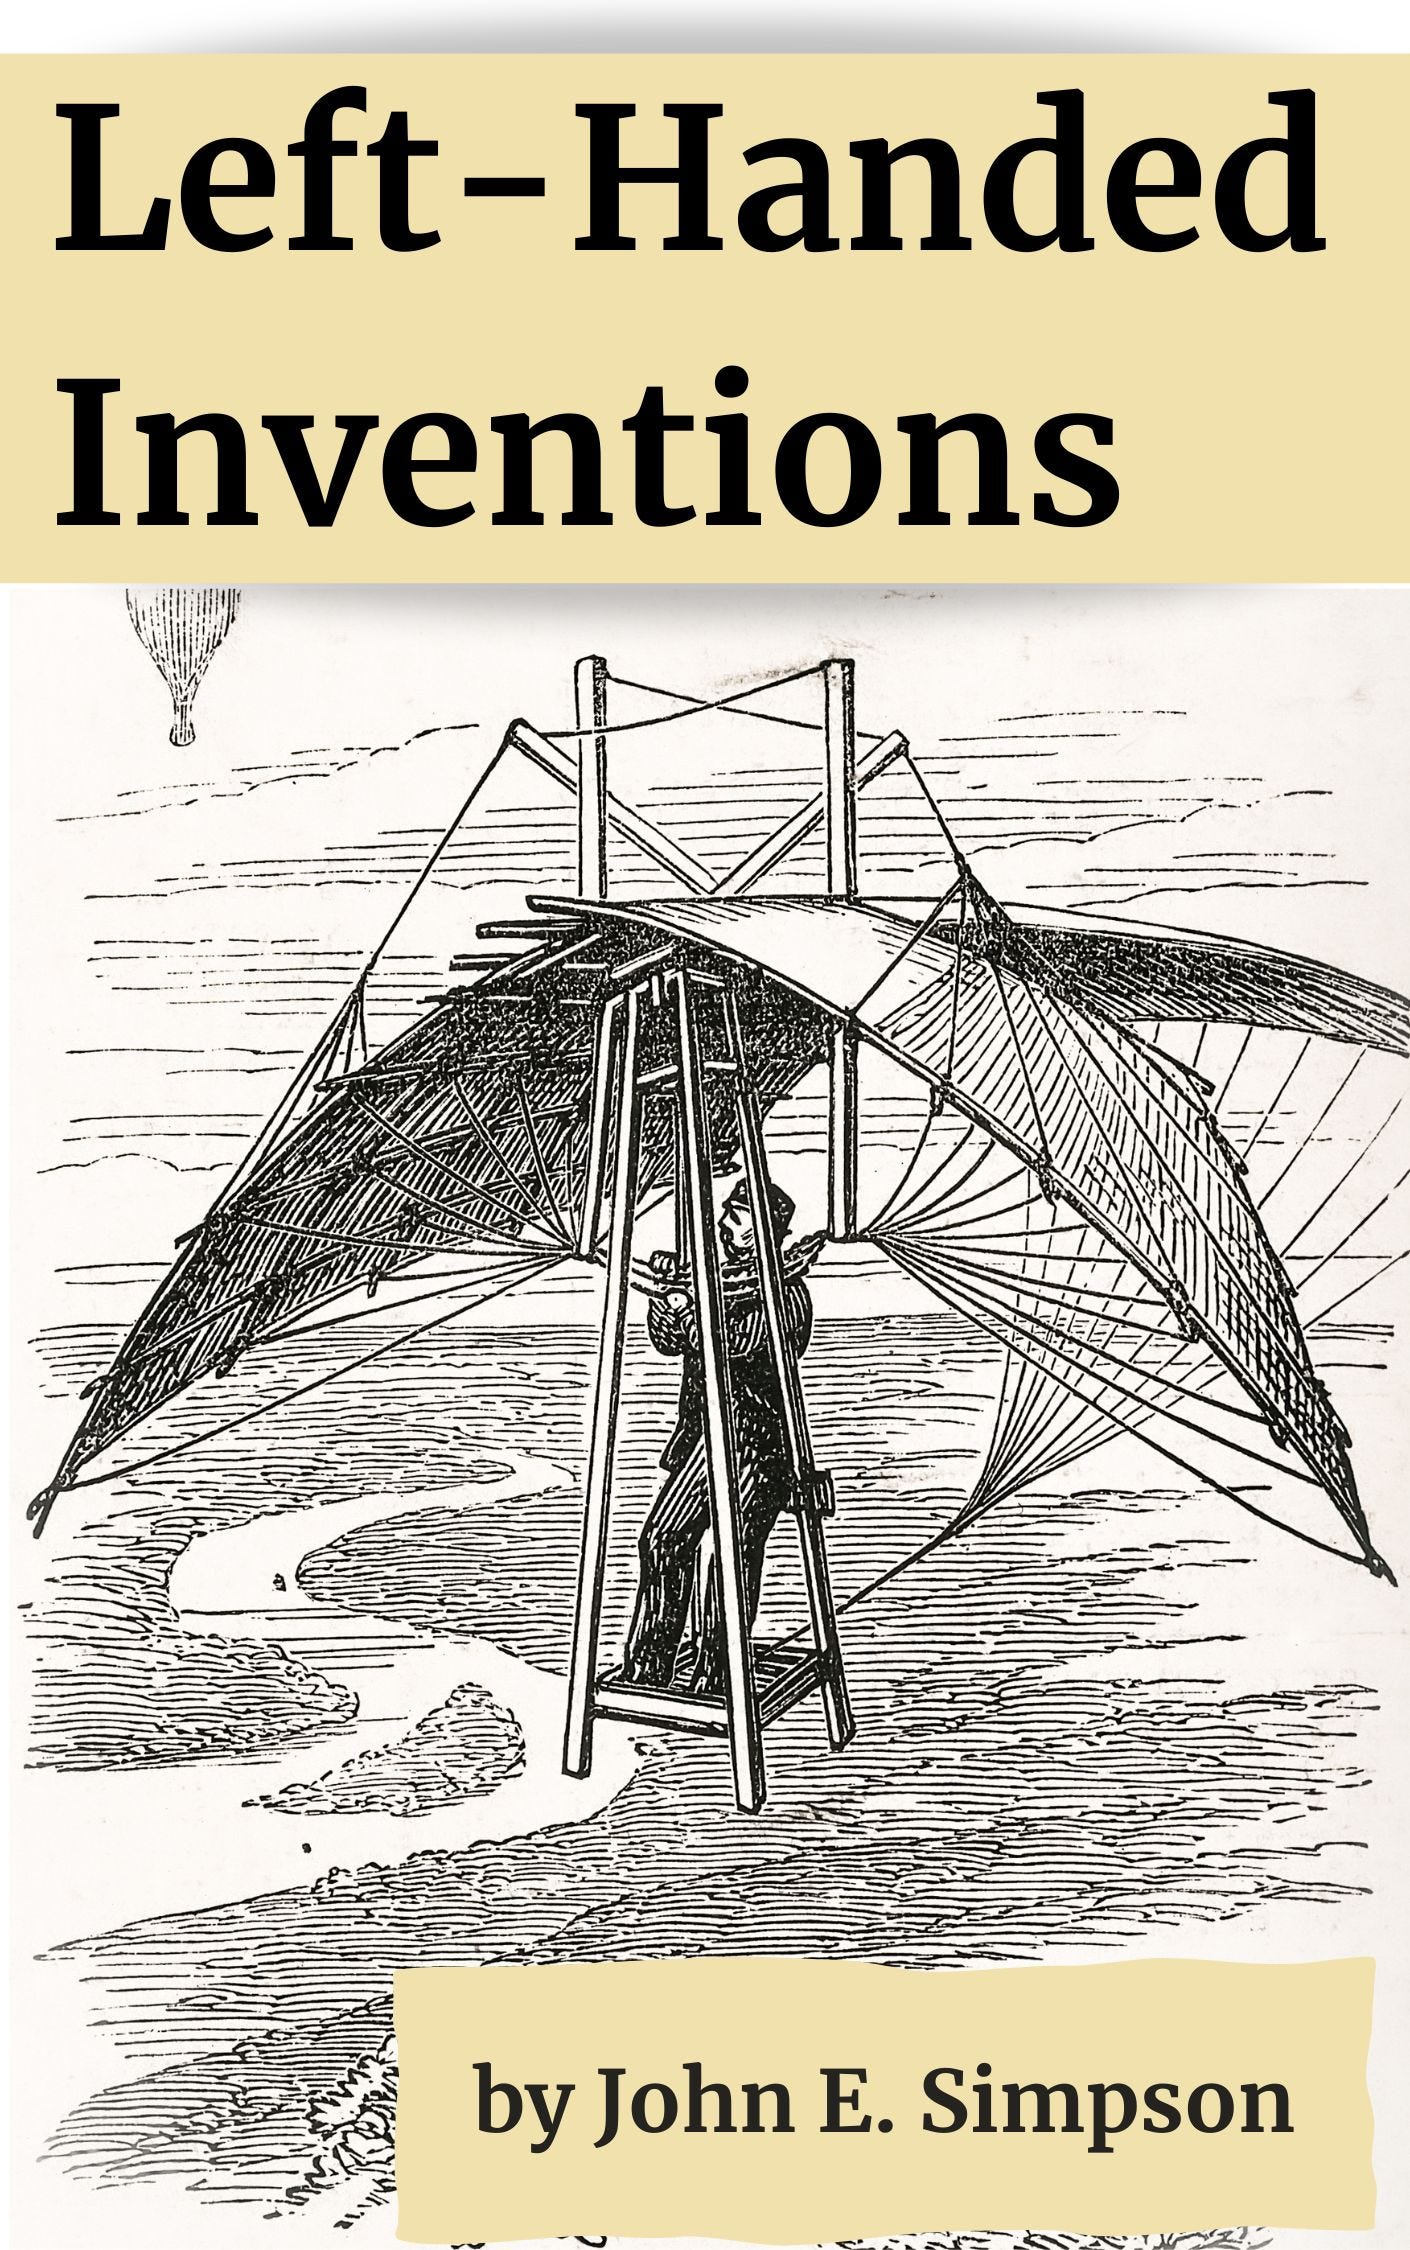 A black-and-white engraving of a 19th-century man aloft in some weird flying contraption: several long pieces of wood, some short pieces as well, three wings, and a series of struts and wires supporting a wooden platform upon which the man stands. Far below, we see a river; in the background, some clouds and what appears to be a balloon wih a basket dangling beneath, drifting away. The book title and author's name are superimposed over the engraving.